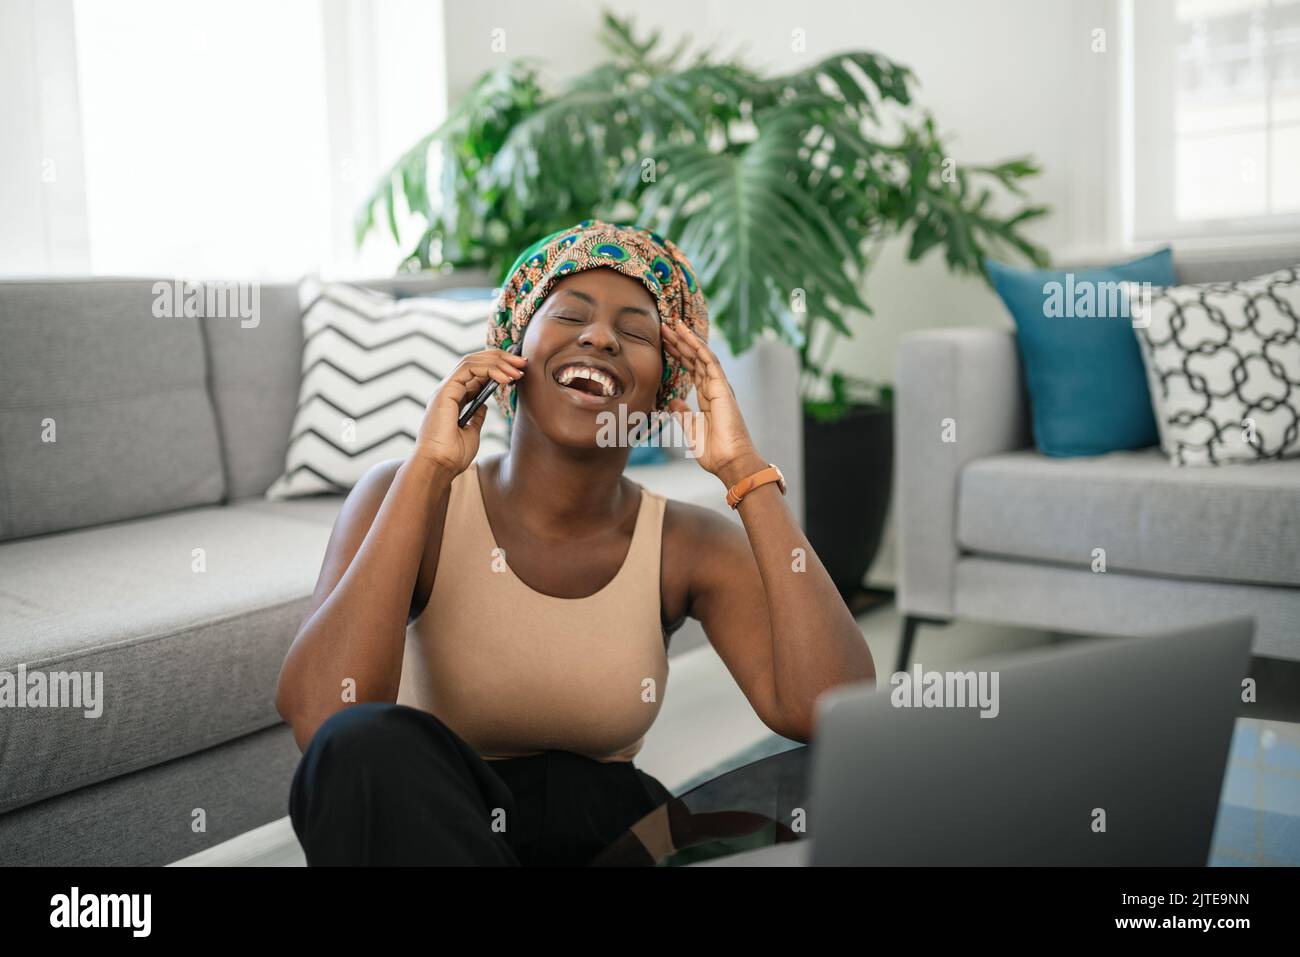 Beautiful Black African woman at home, smiling and laughing, using mobile smart phone, wearing traditional headscarf, surprised and happy Stock Photo